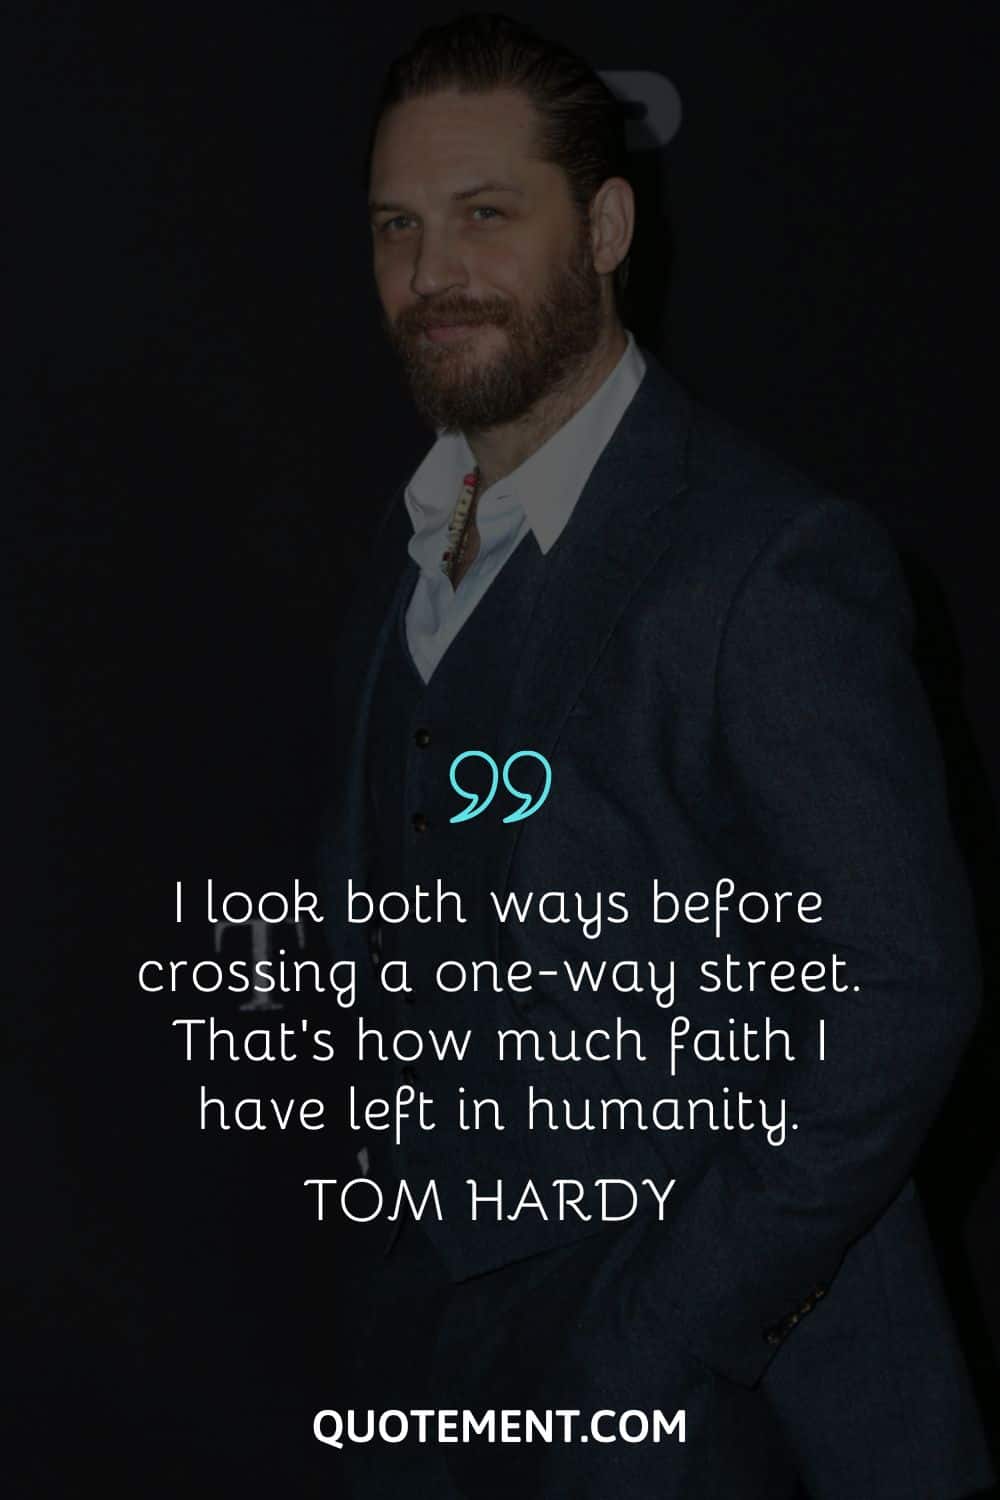 tom hardy in a suit image representing tom hardy quote